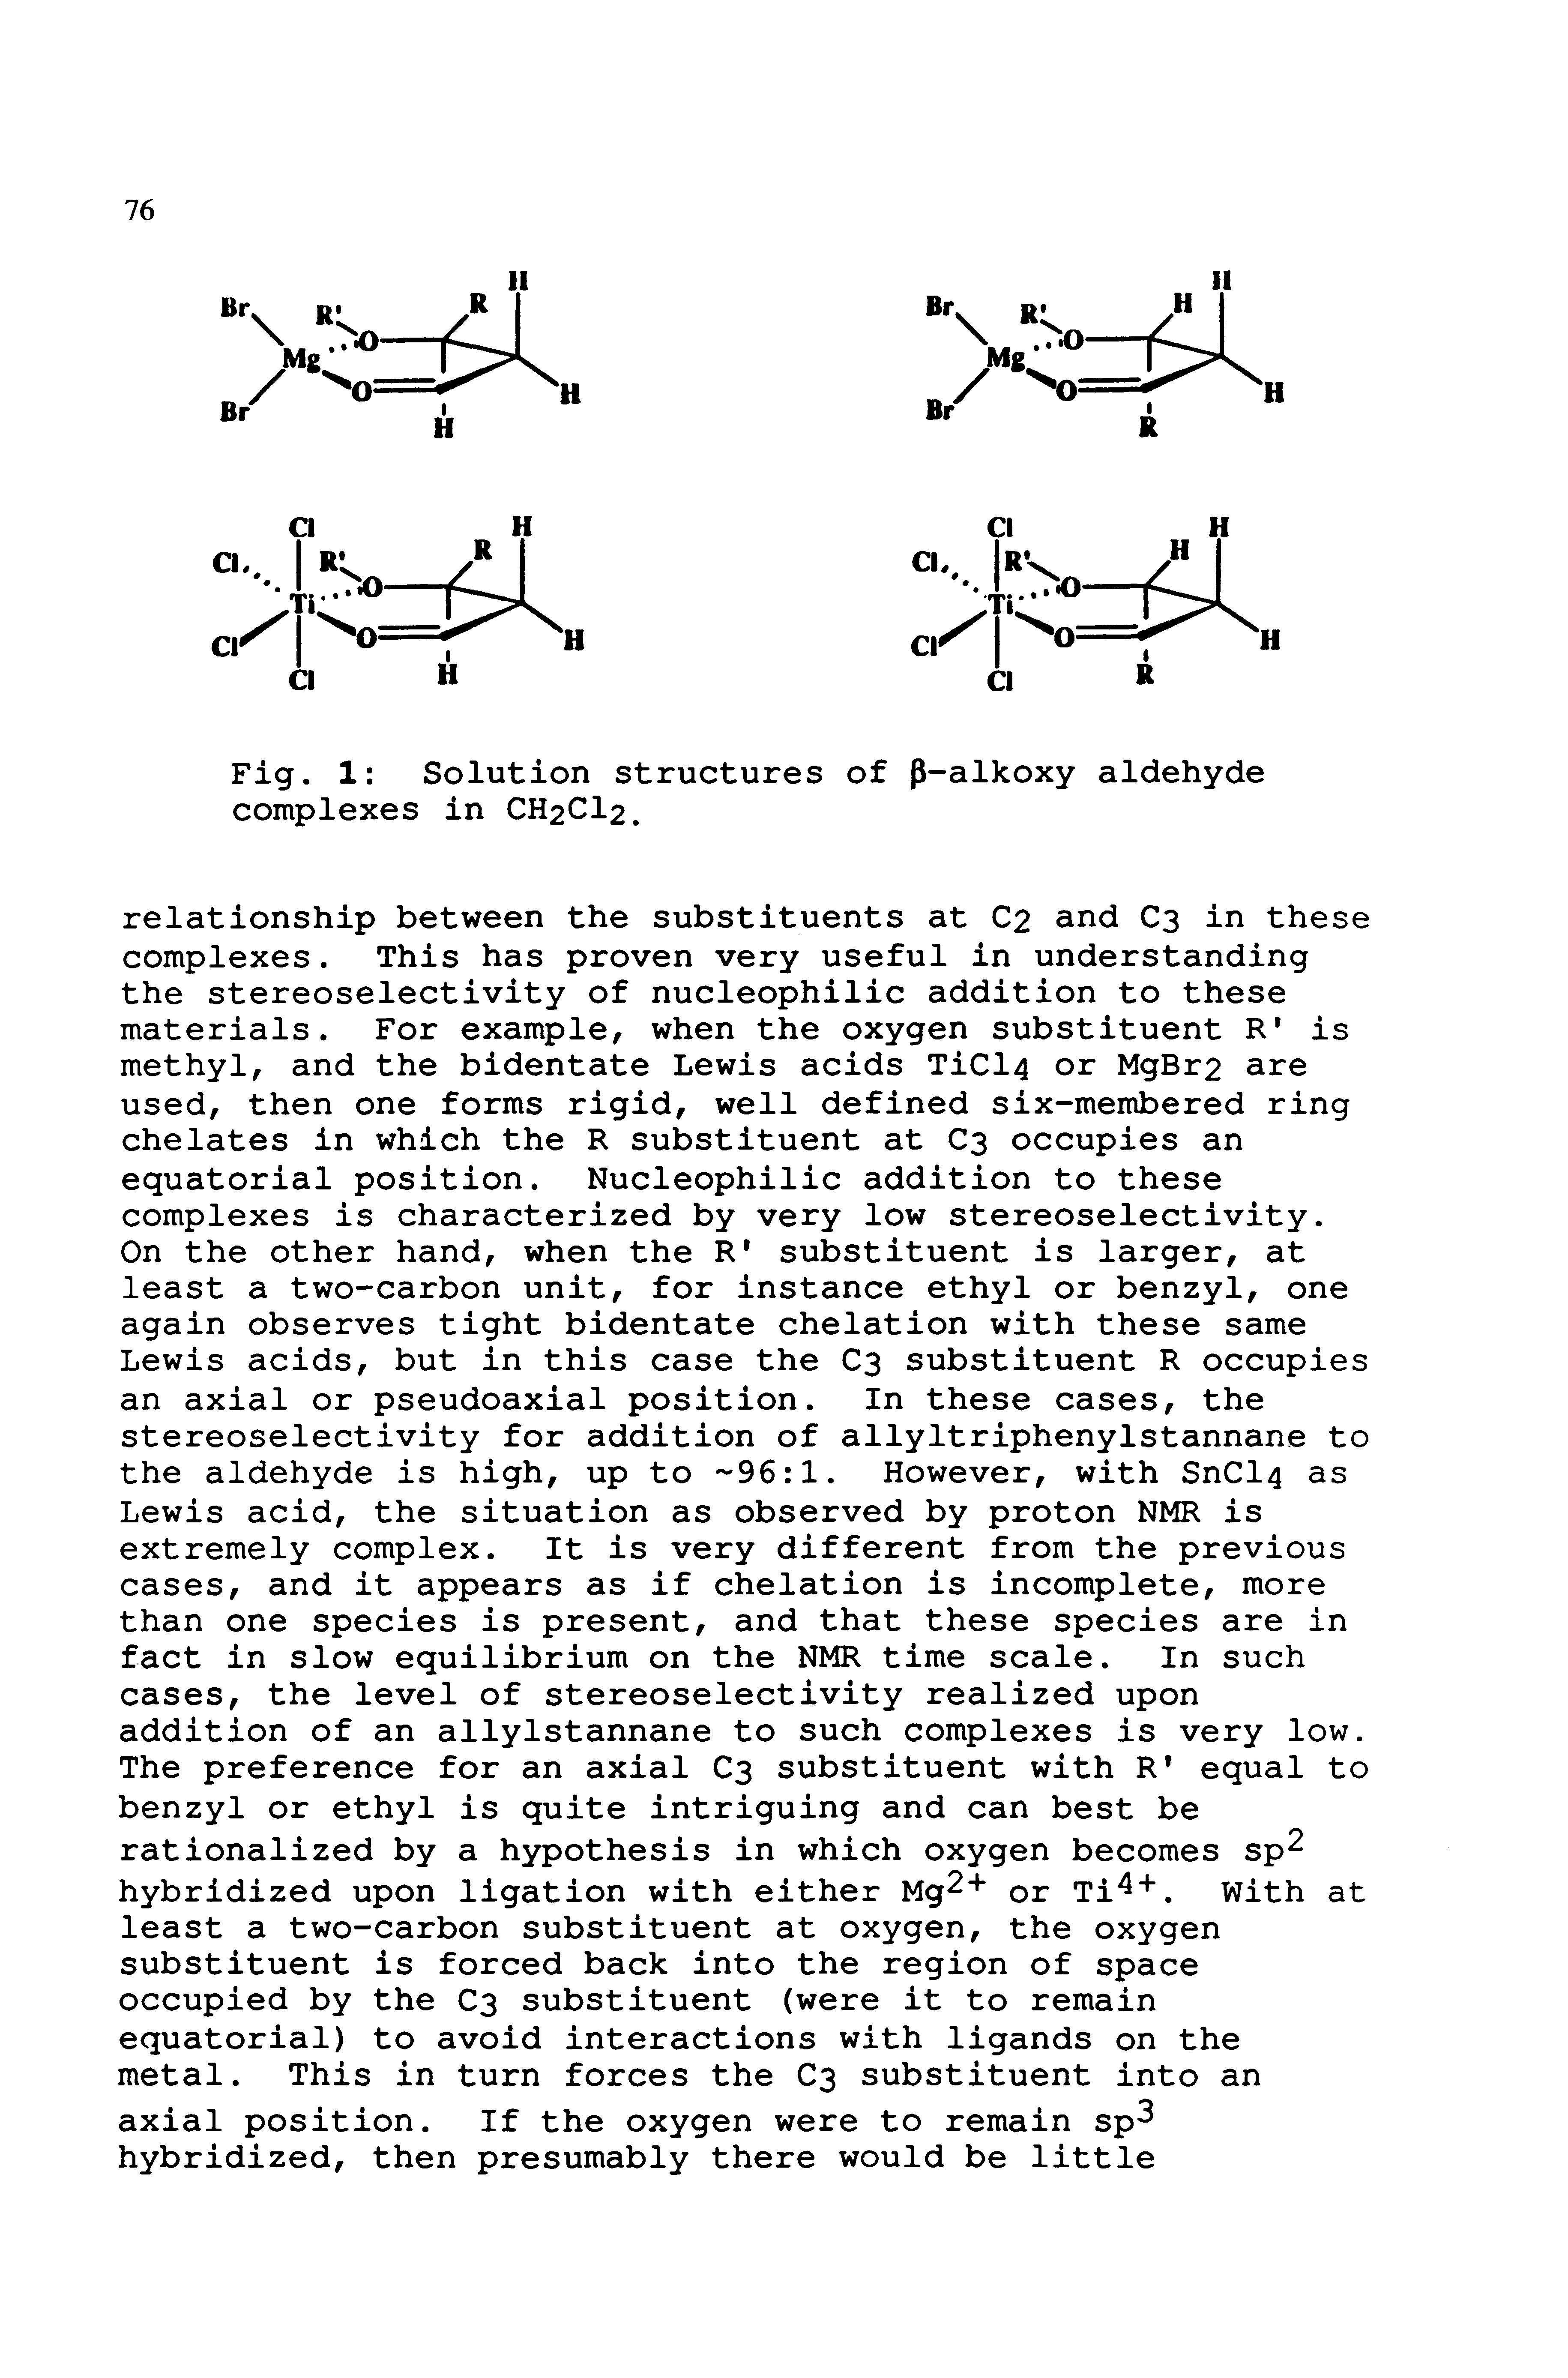 Fig. 1 Solution structures of p-alkoxy aldehyde complexes in CH2CI2.